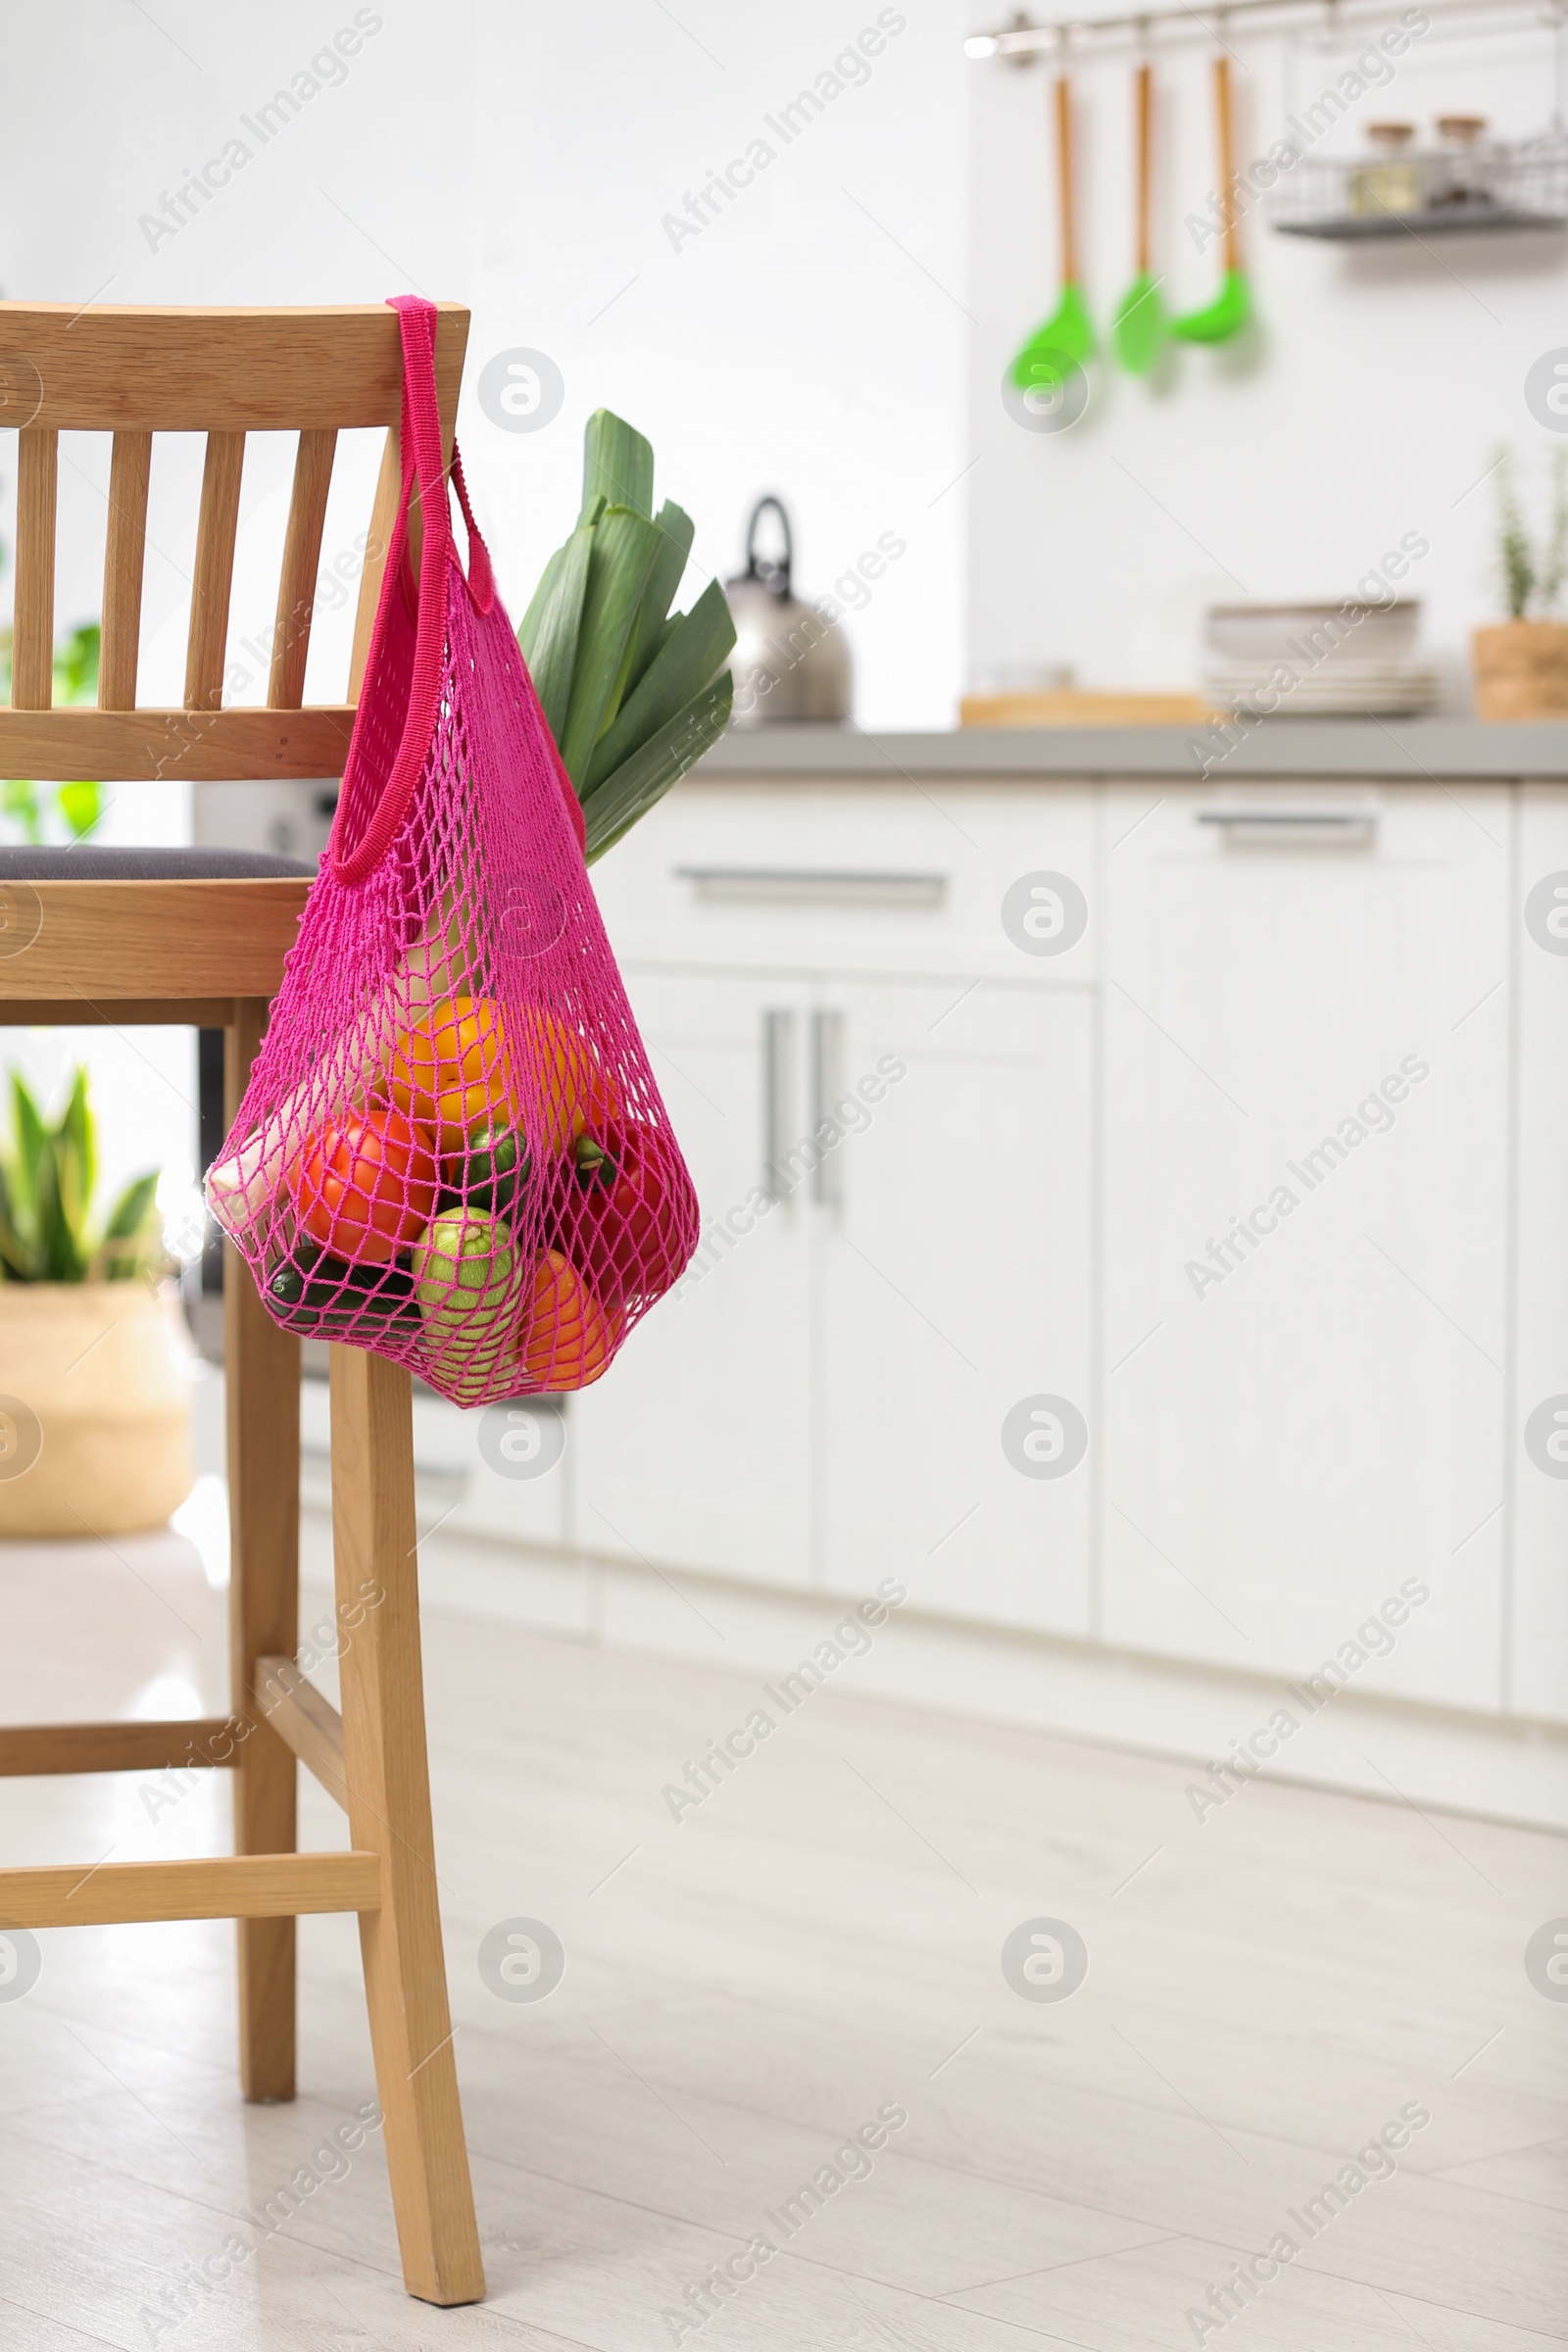 Photo of Net bag with vegetables hanging on wooden chair in kitchen